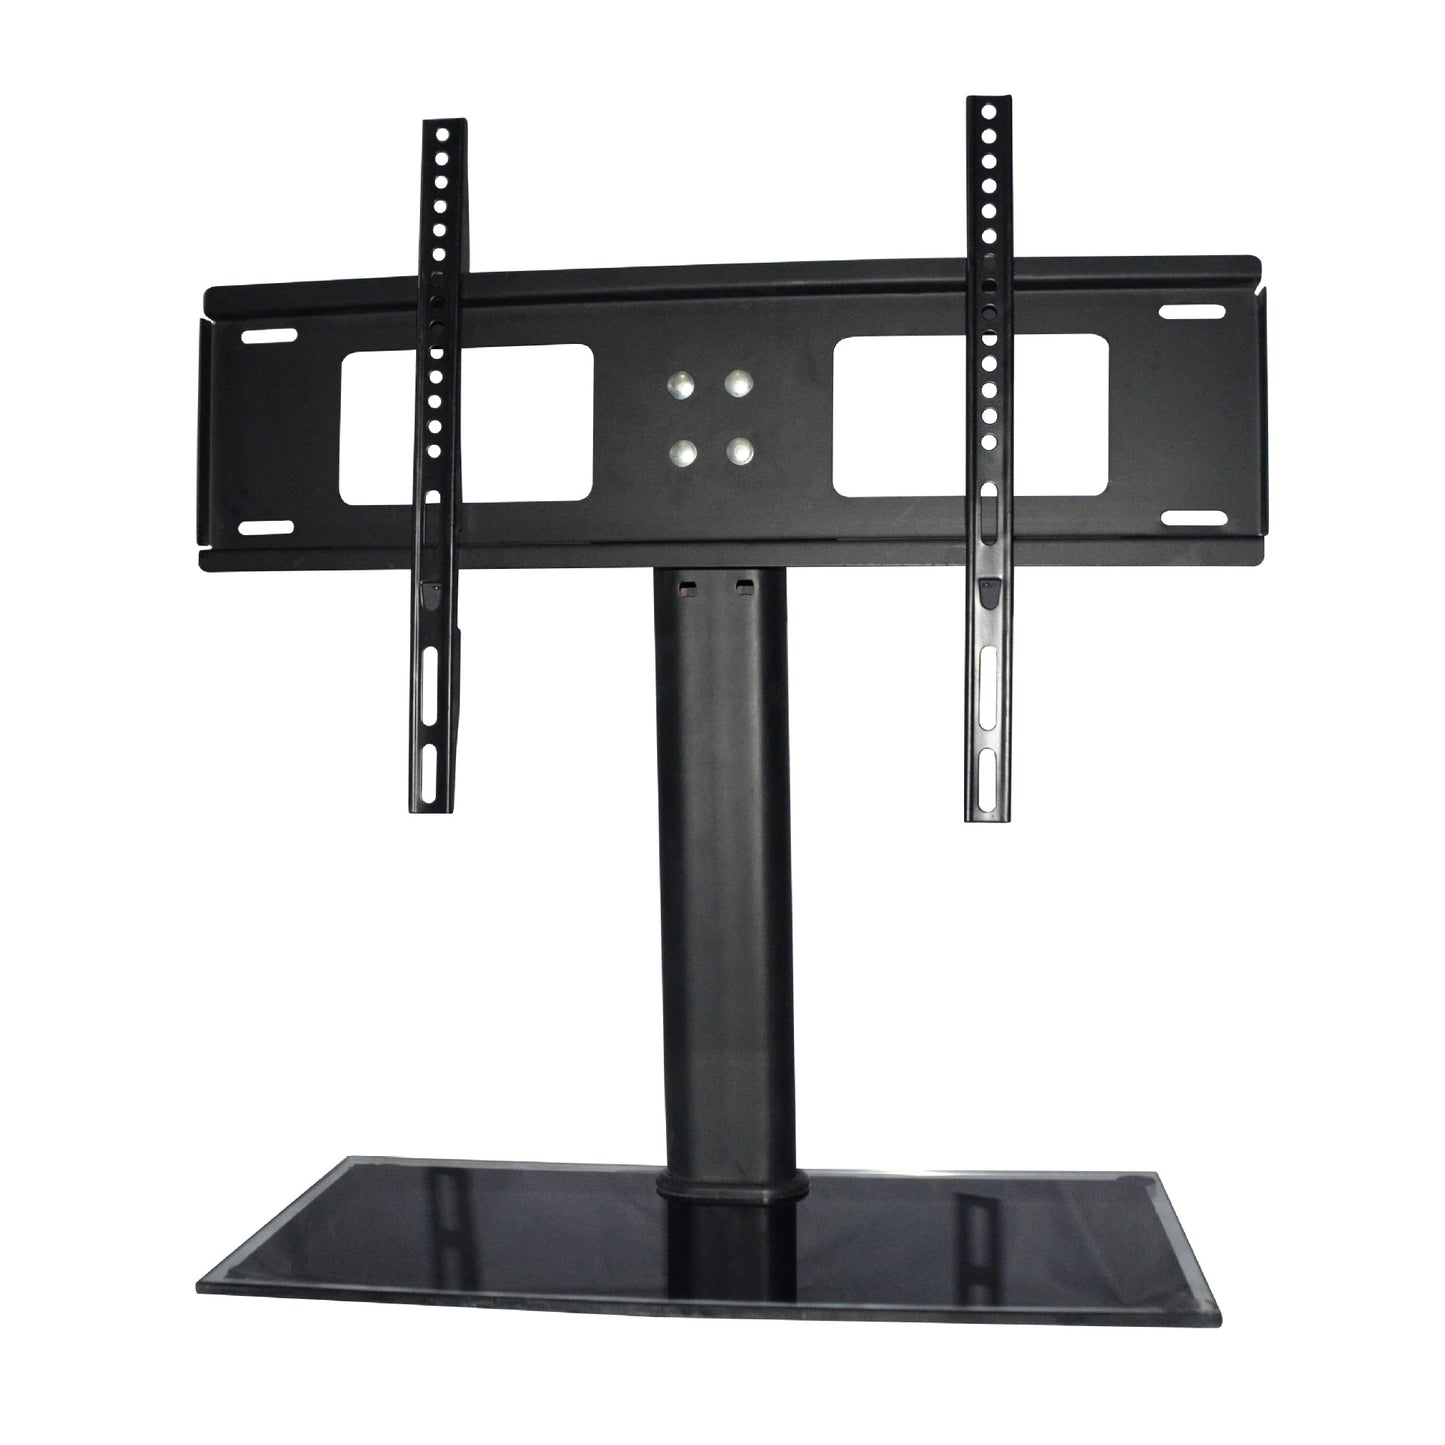 Three-gear Adjustable Multifunctional LCD TV Stand